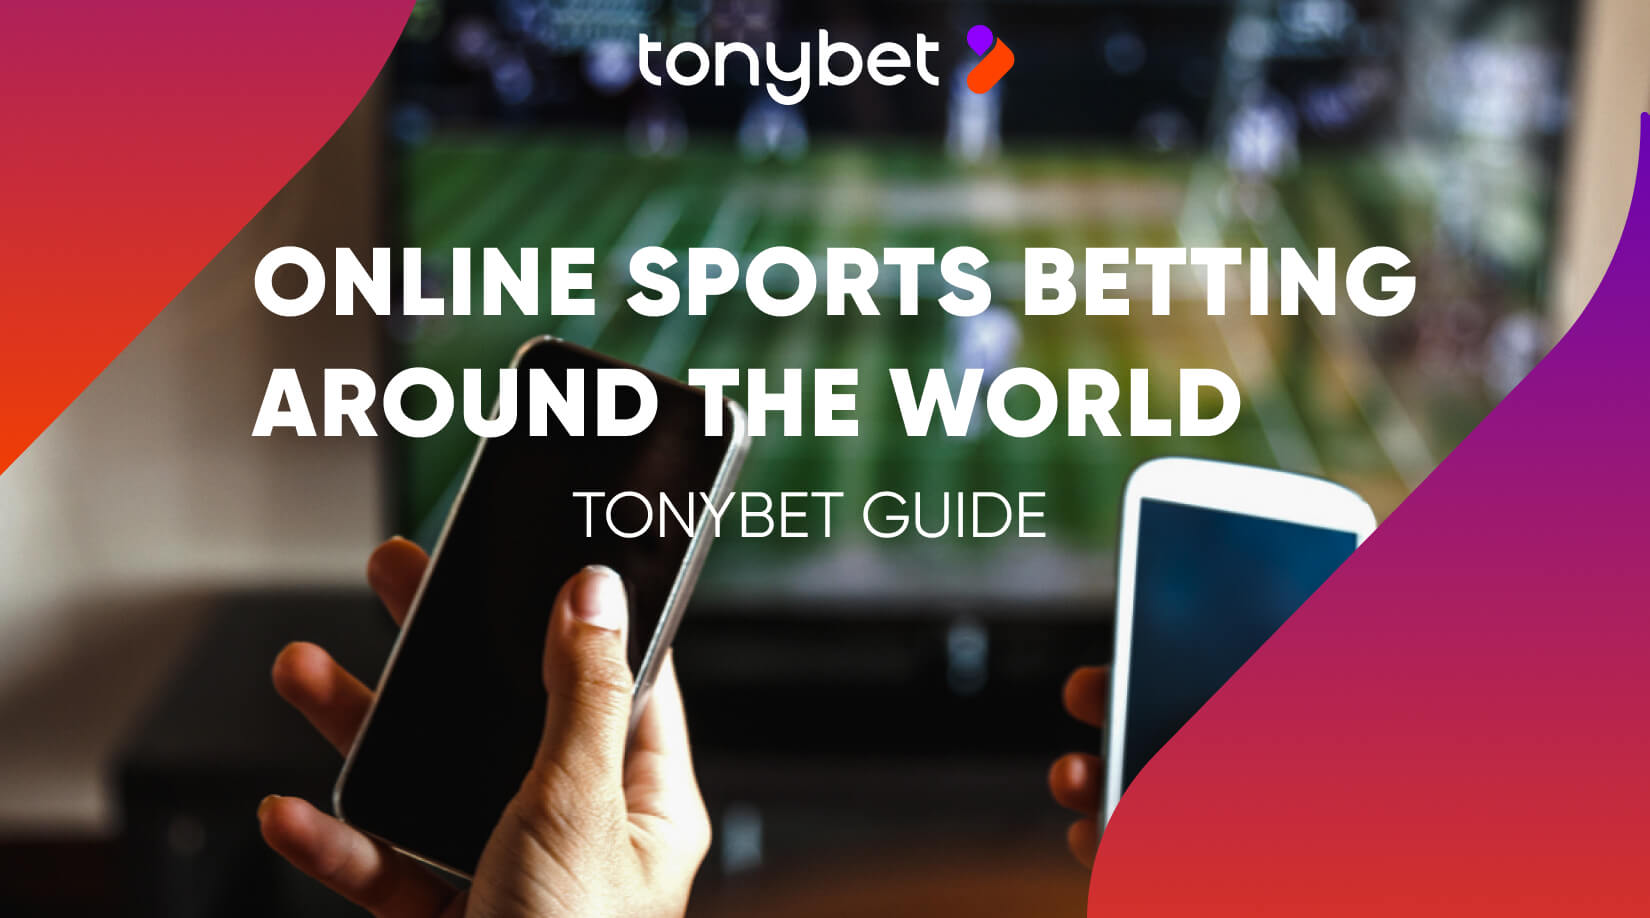 Global Sports Betting Overview